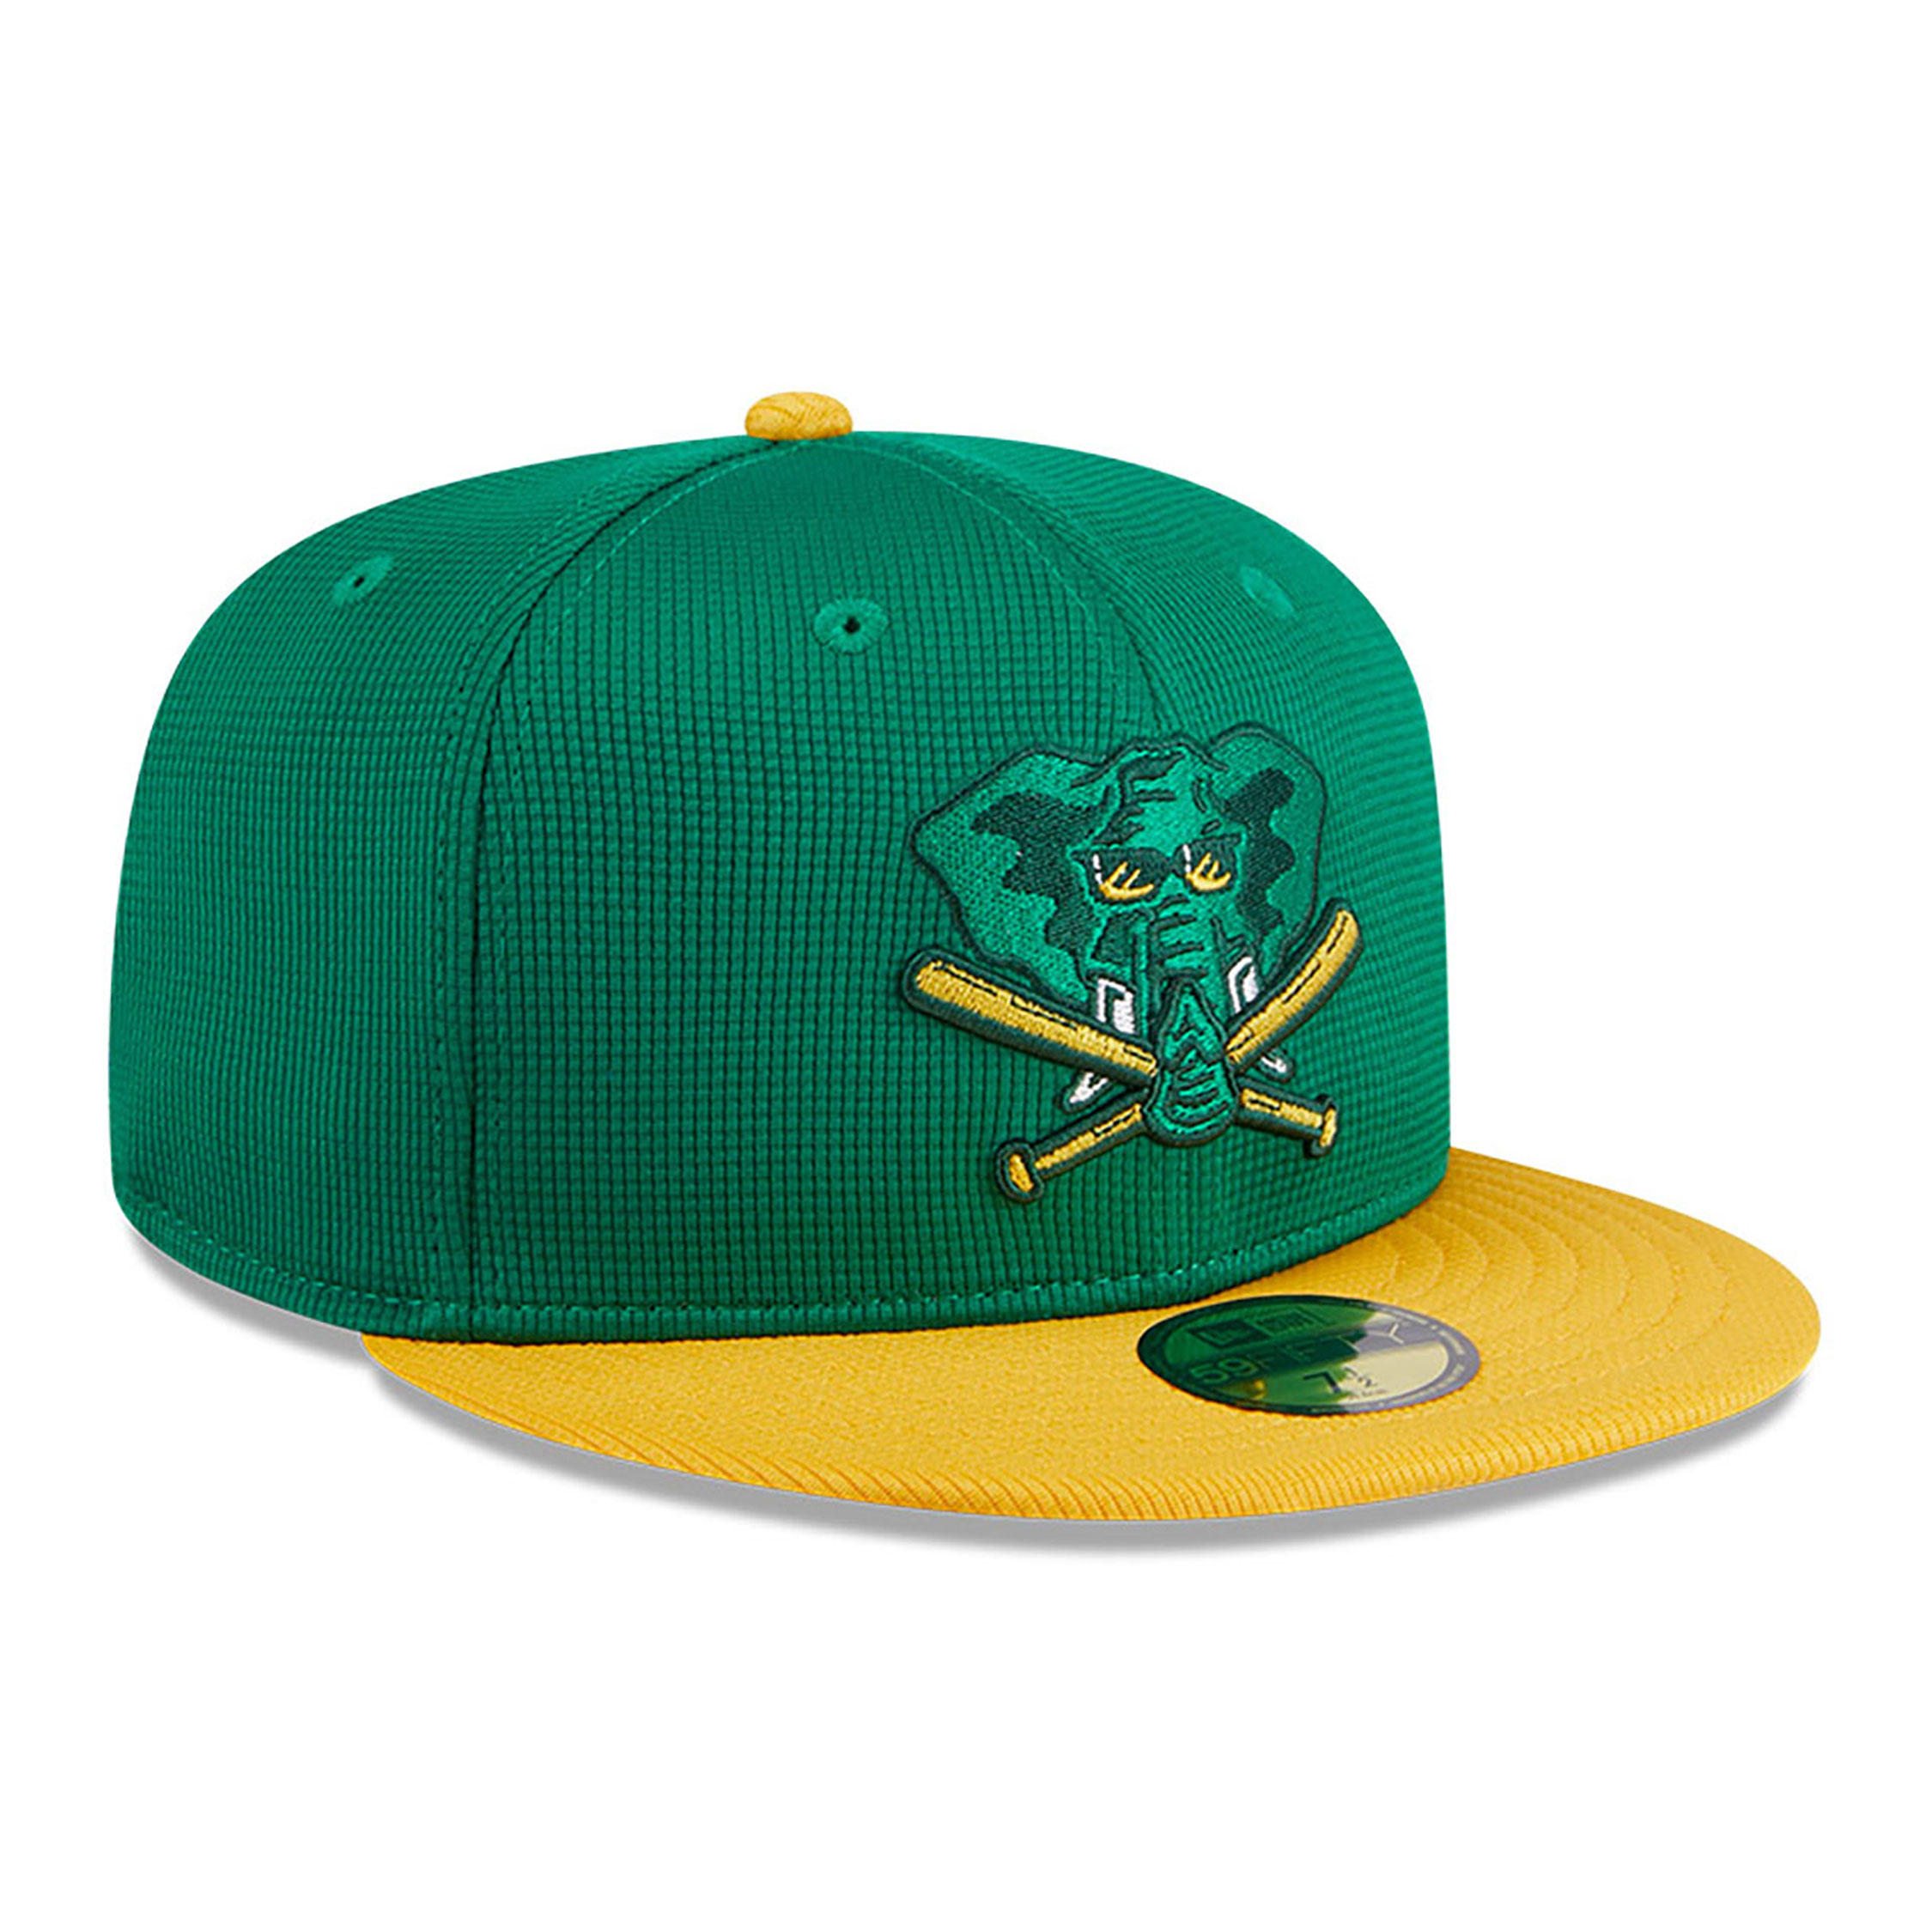 Oakland Athletics MLB Batting Practice Dark Green 59FIFTY Fitted Cap